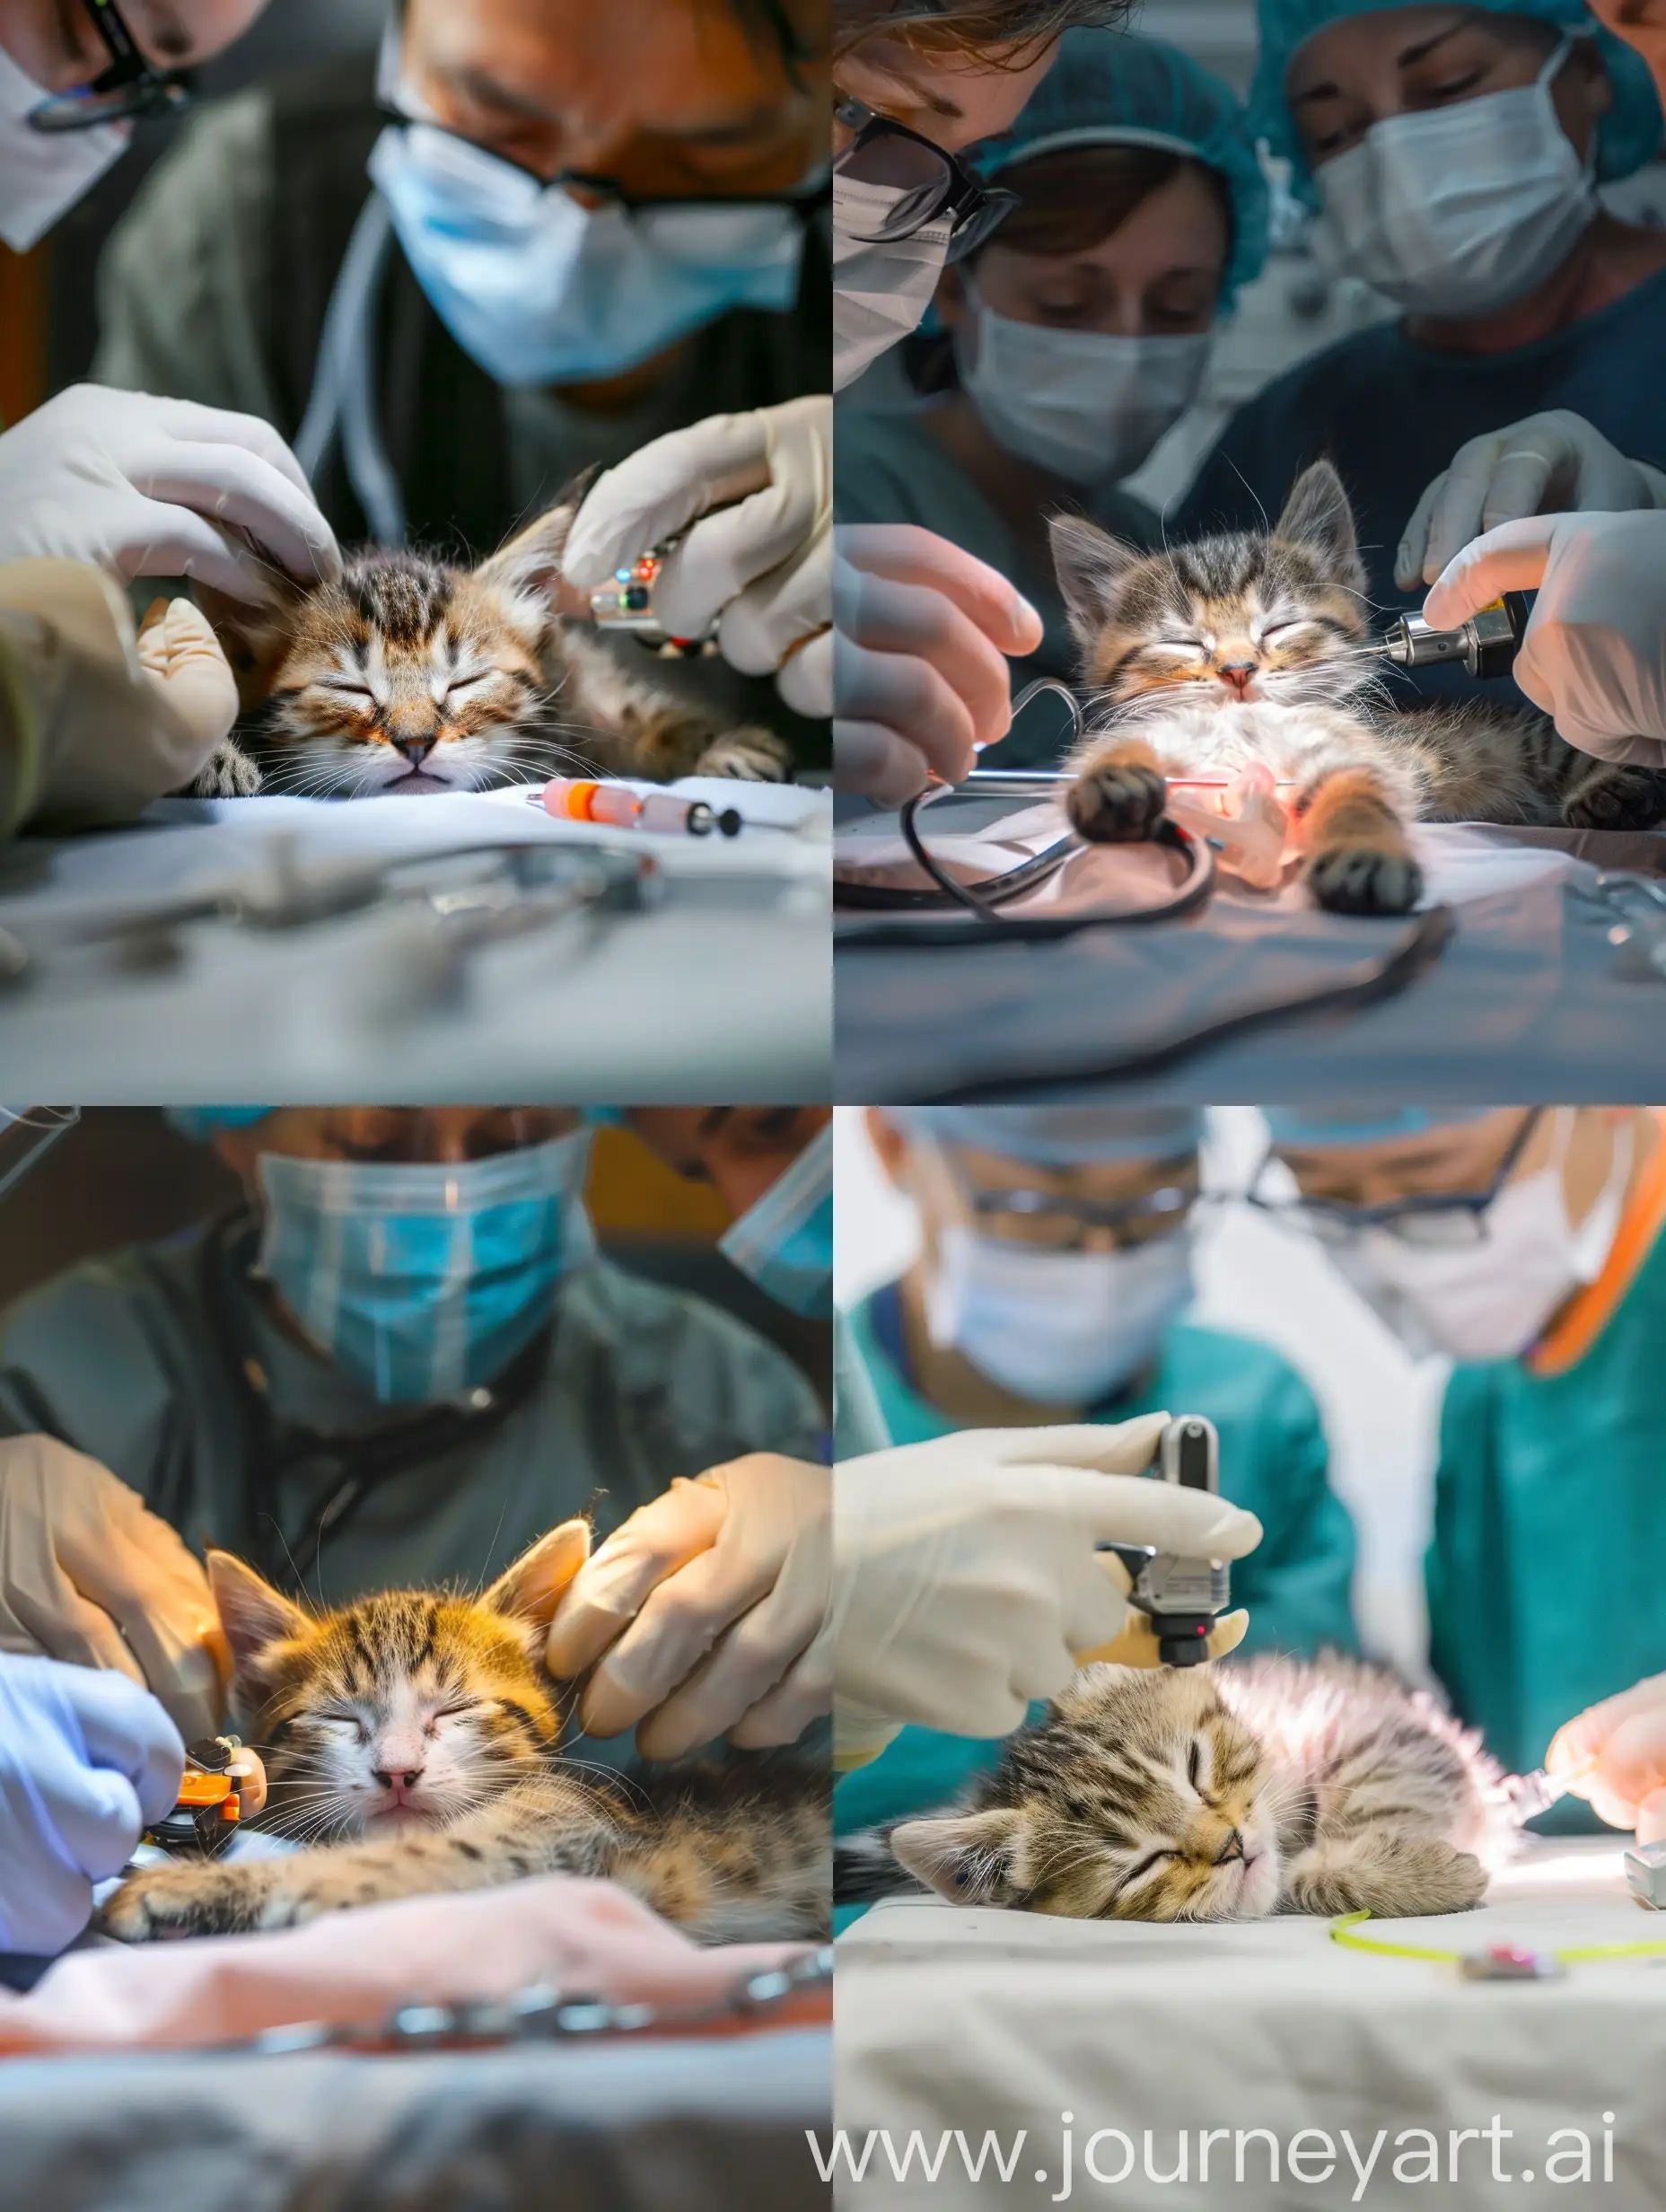 Adorable-Kitten-Undergoing-Lifesaving-Surgery-with-Compassionate-Doctors